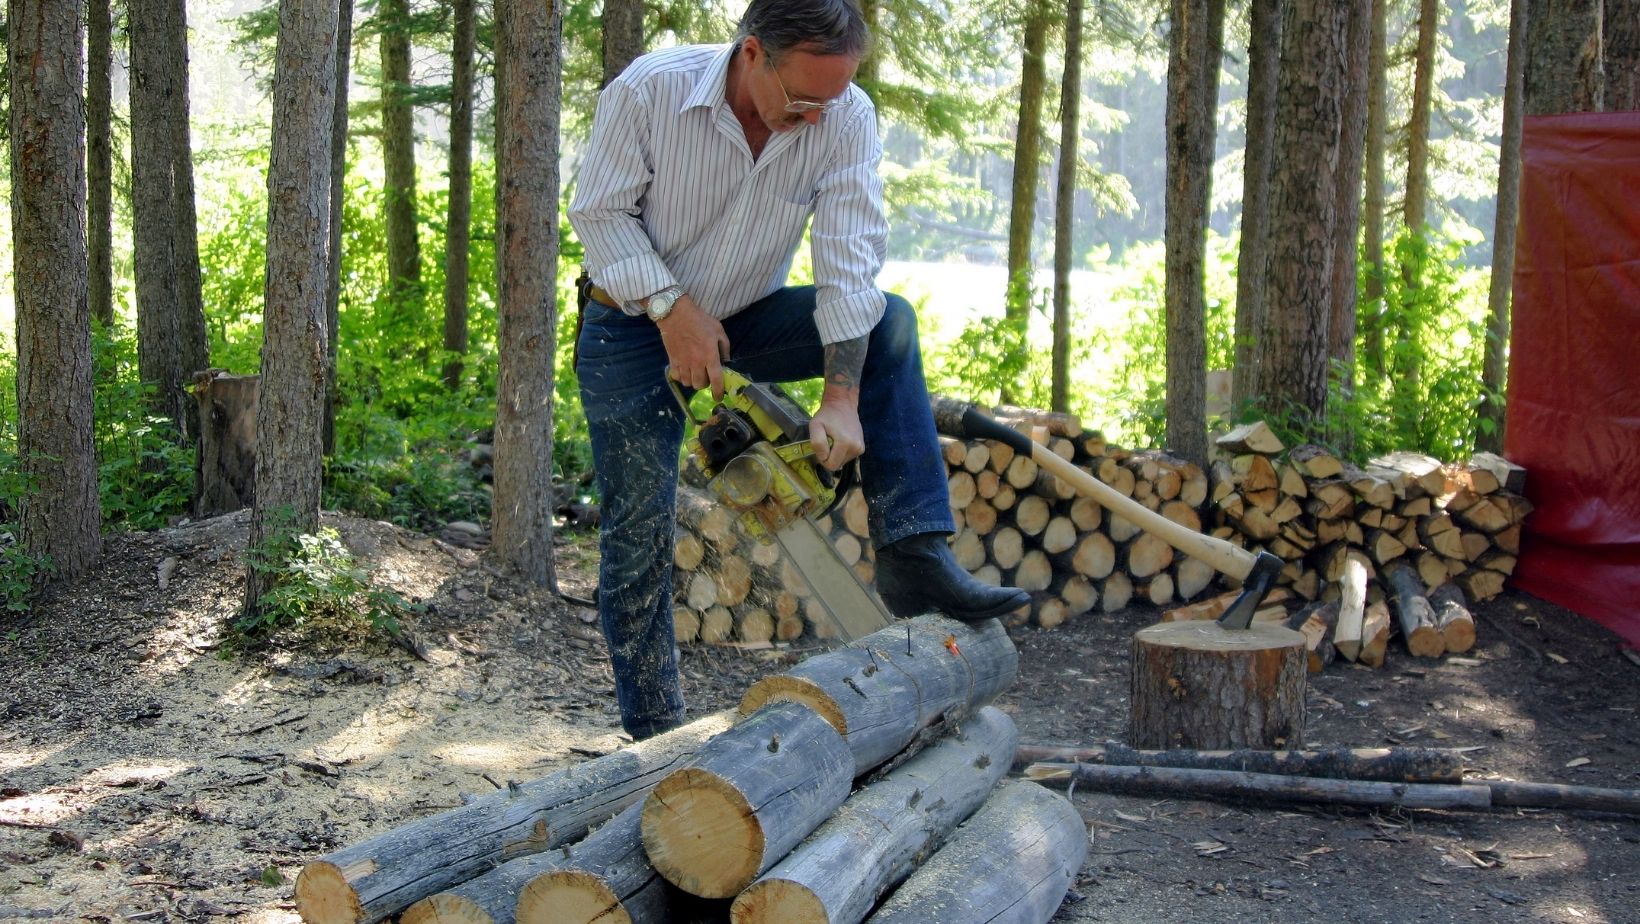 A common task for workcampers is maintaining the campground, including chopping wood for guests to use.